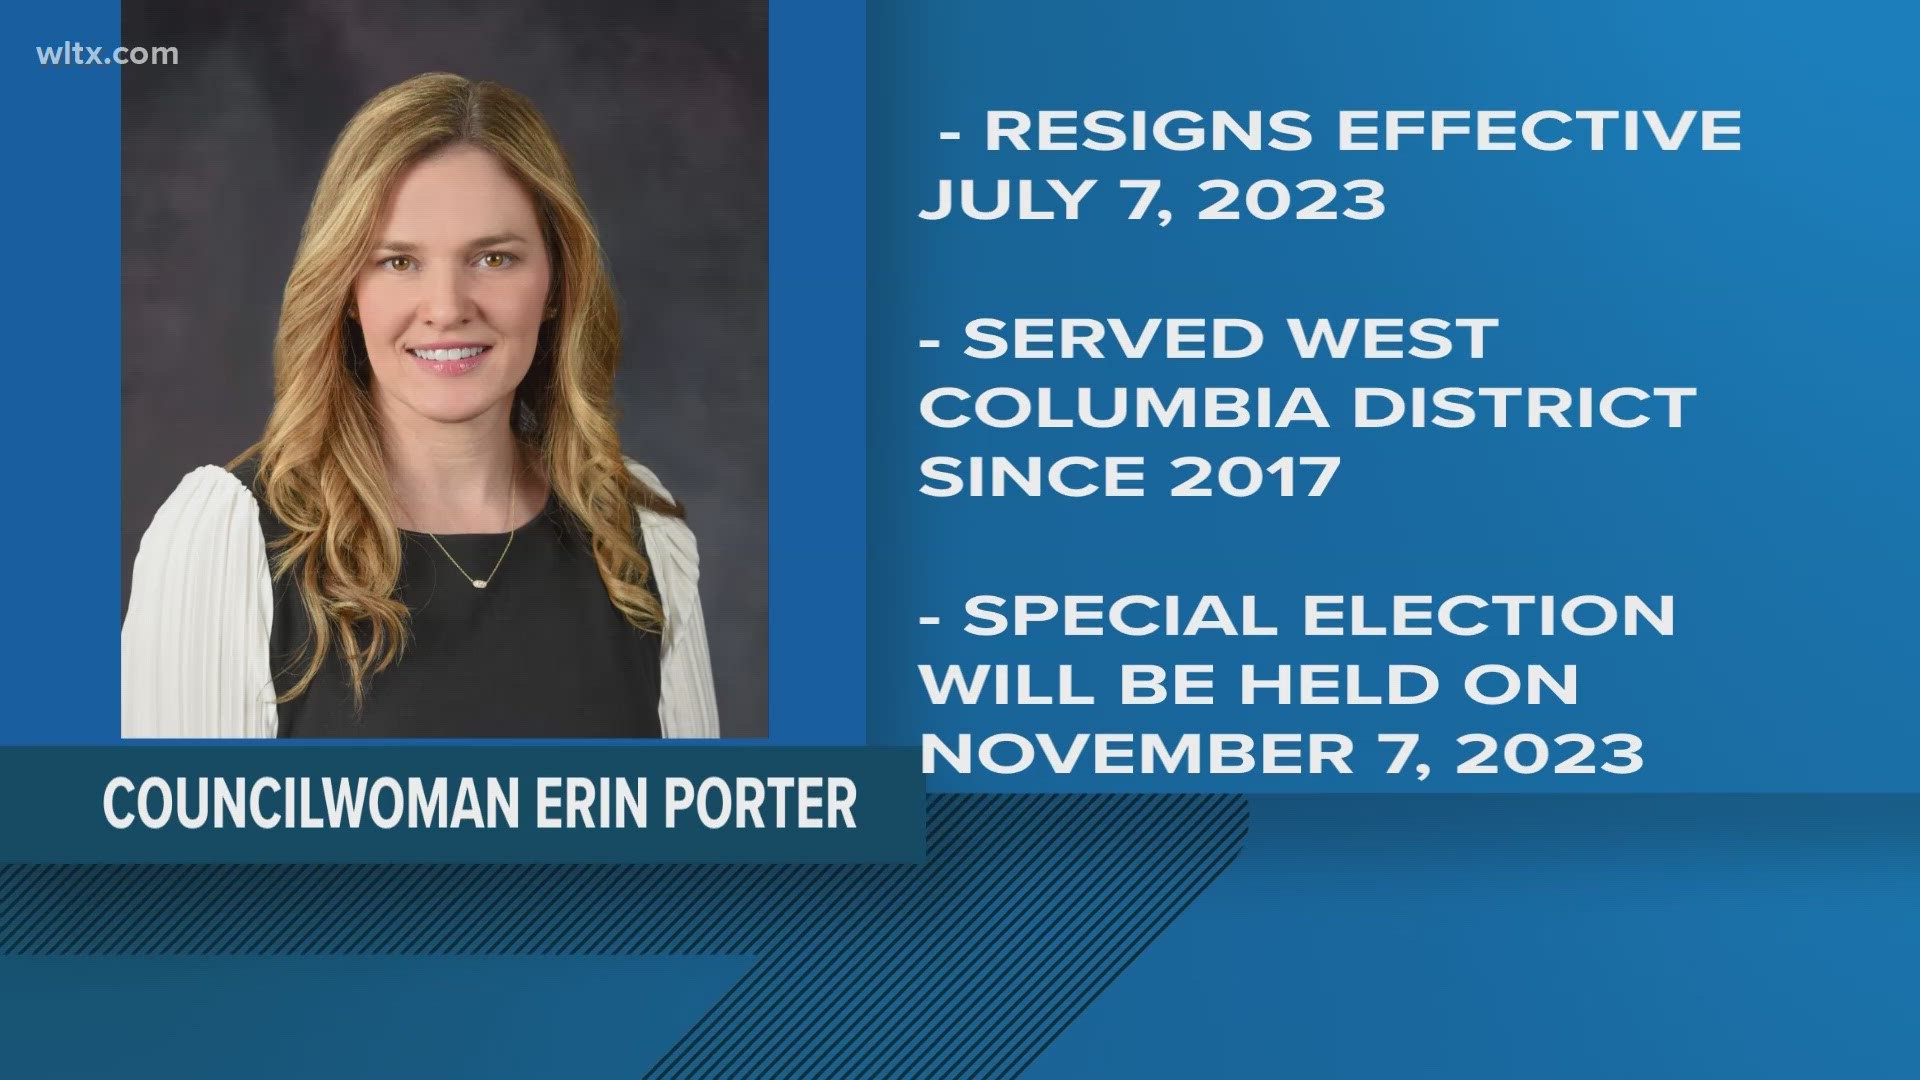 West Columbia Council Member Erin Porter is resigning effective July 7. Here's why and when the special election fill her seat will be held.